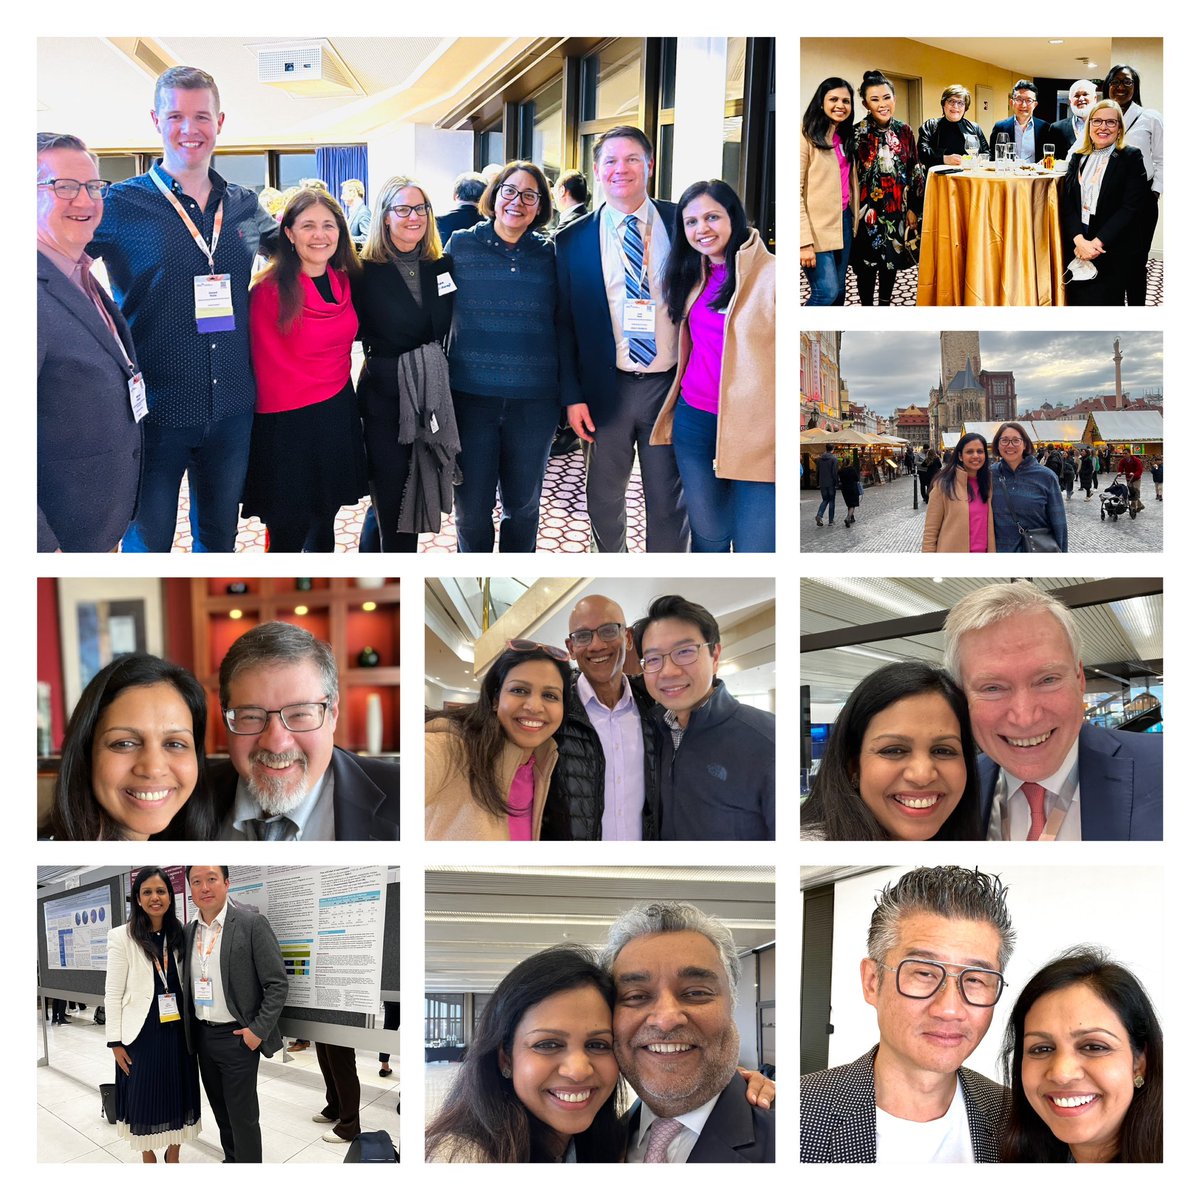 Leaving @myesmo @IASLC #Prague with a full heart- so amazing to see old friends & new and hear advances in #LungCancer! #ELCC24 @danieltanmd @AnneTsao2 @JhanelleGray @ReckampK @JoeChangMD @PC3Innovation @PennCancer